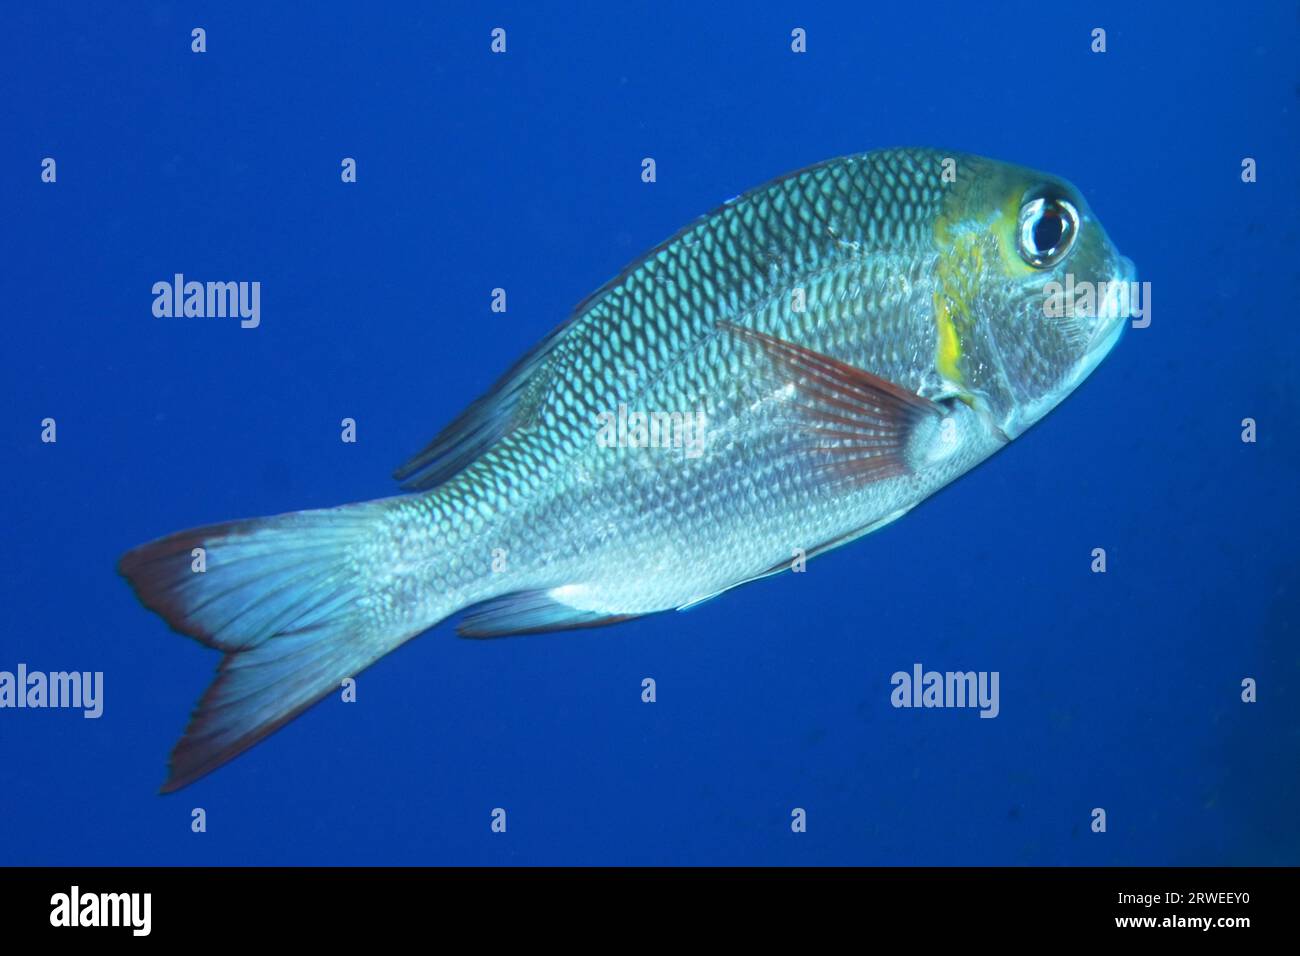 Humpnose big-eye bream (Monotaxis grandoculis) against a solid blue background, exempt, St. Johns Reef dive site, Red Sea, Egypt Stock Photo